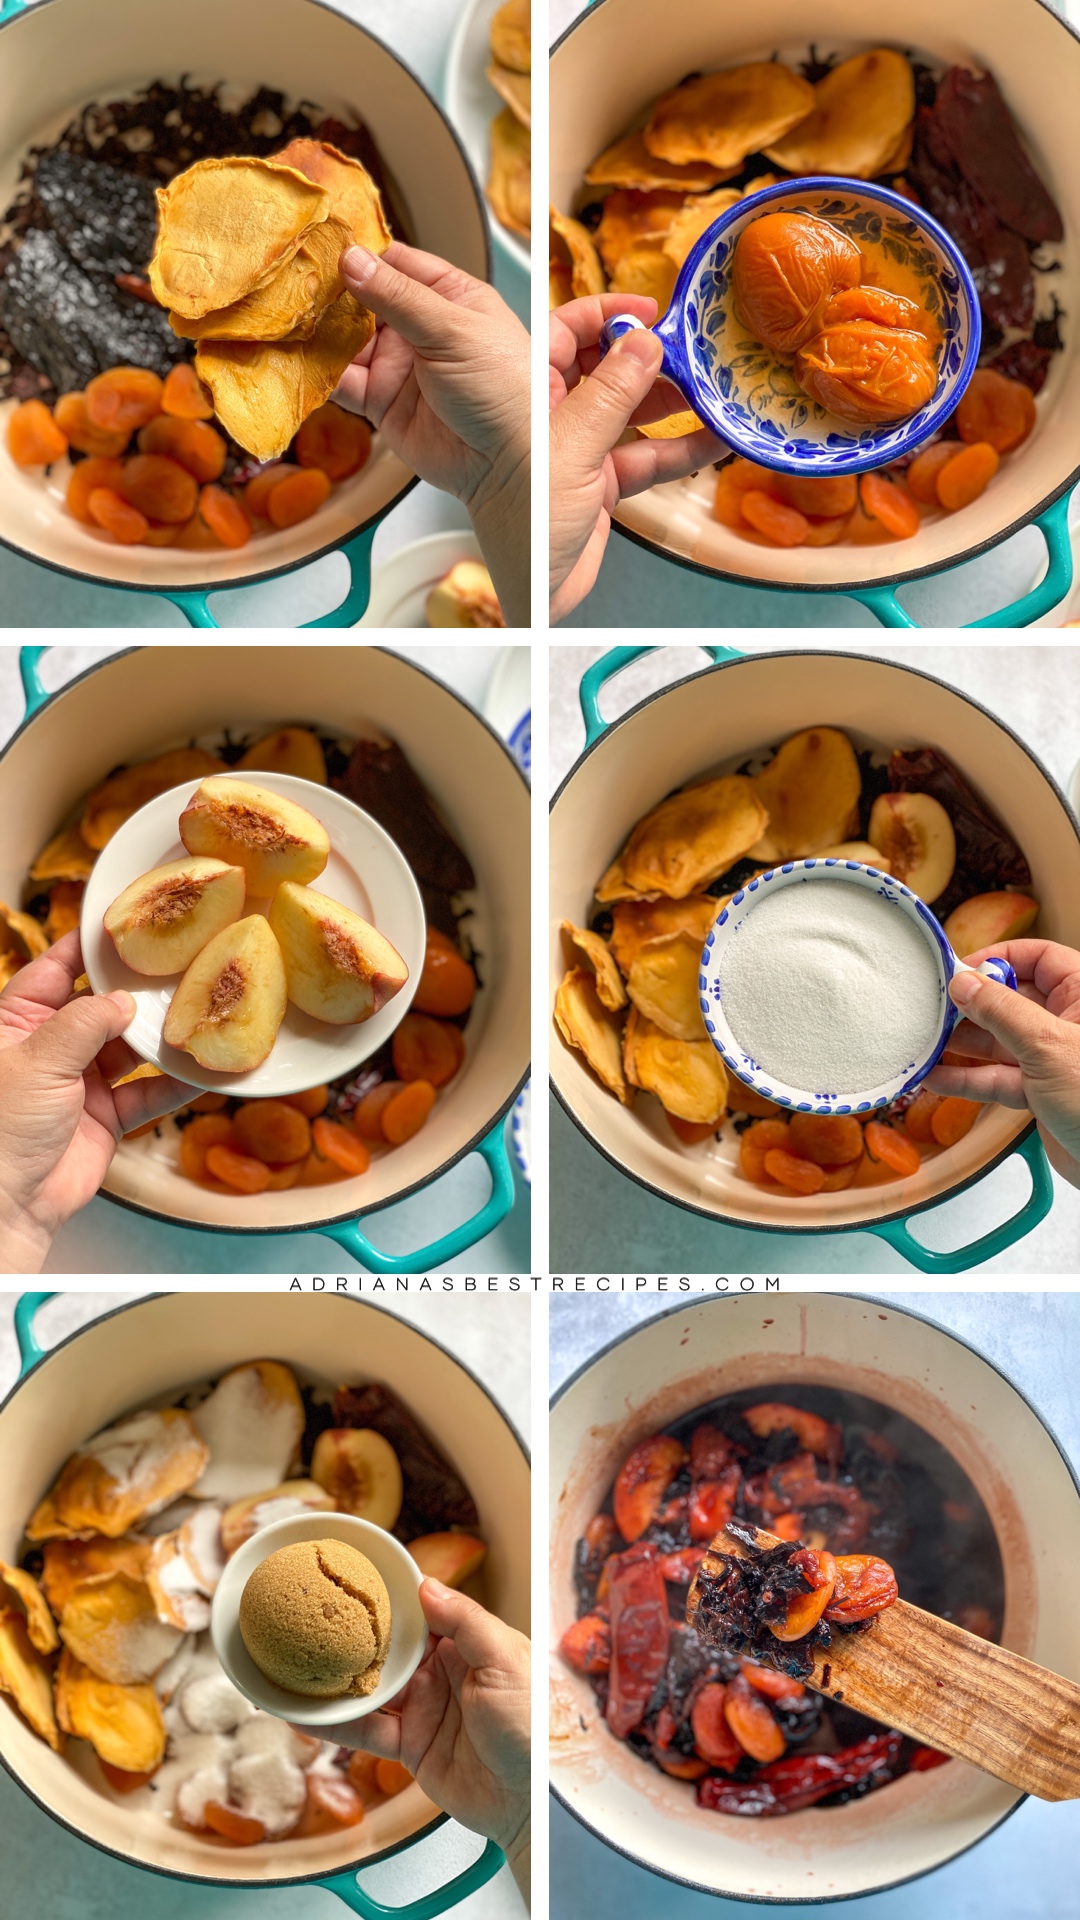 Step by step on how to make chamoy sauce